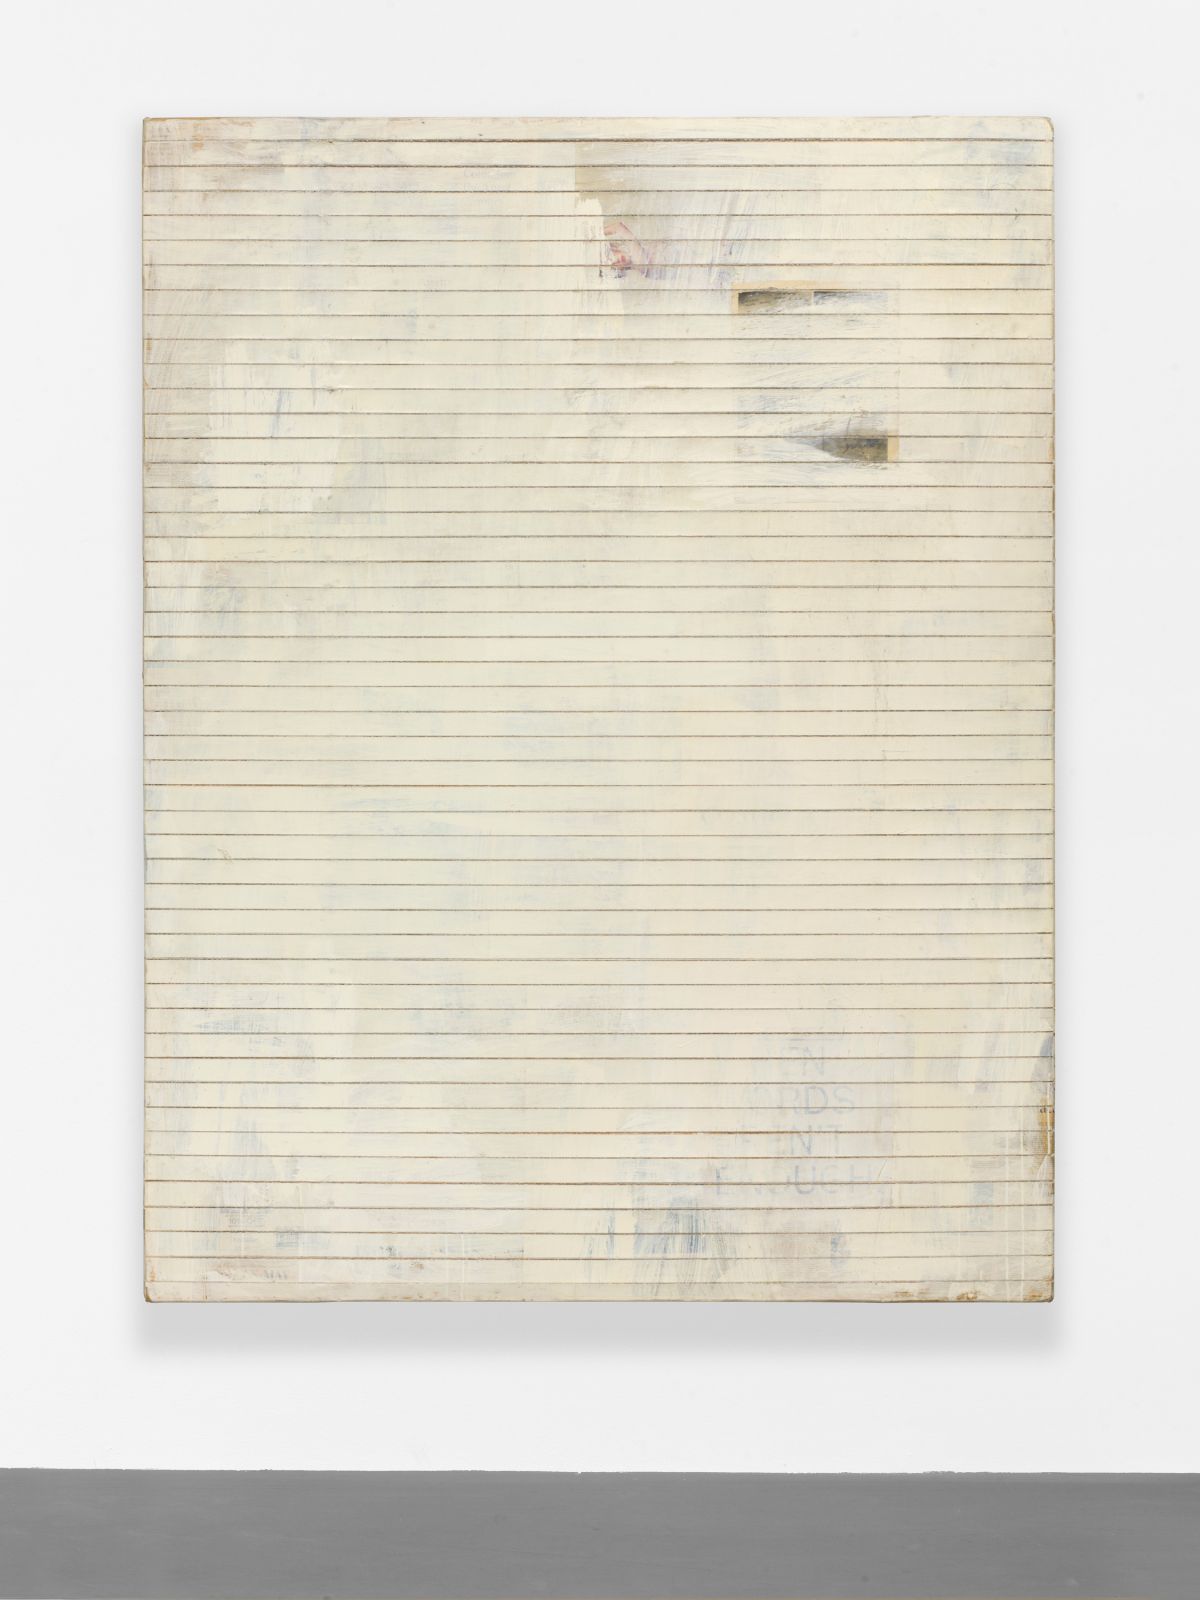 Lawrence Carroll, ‘Untitled (cut painting, white)’, 2016